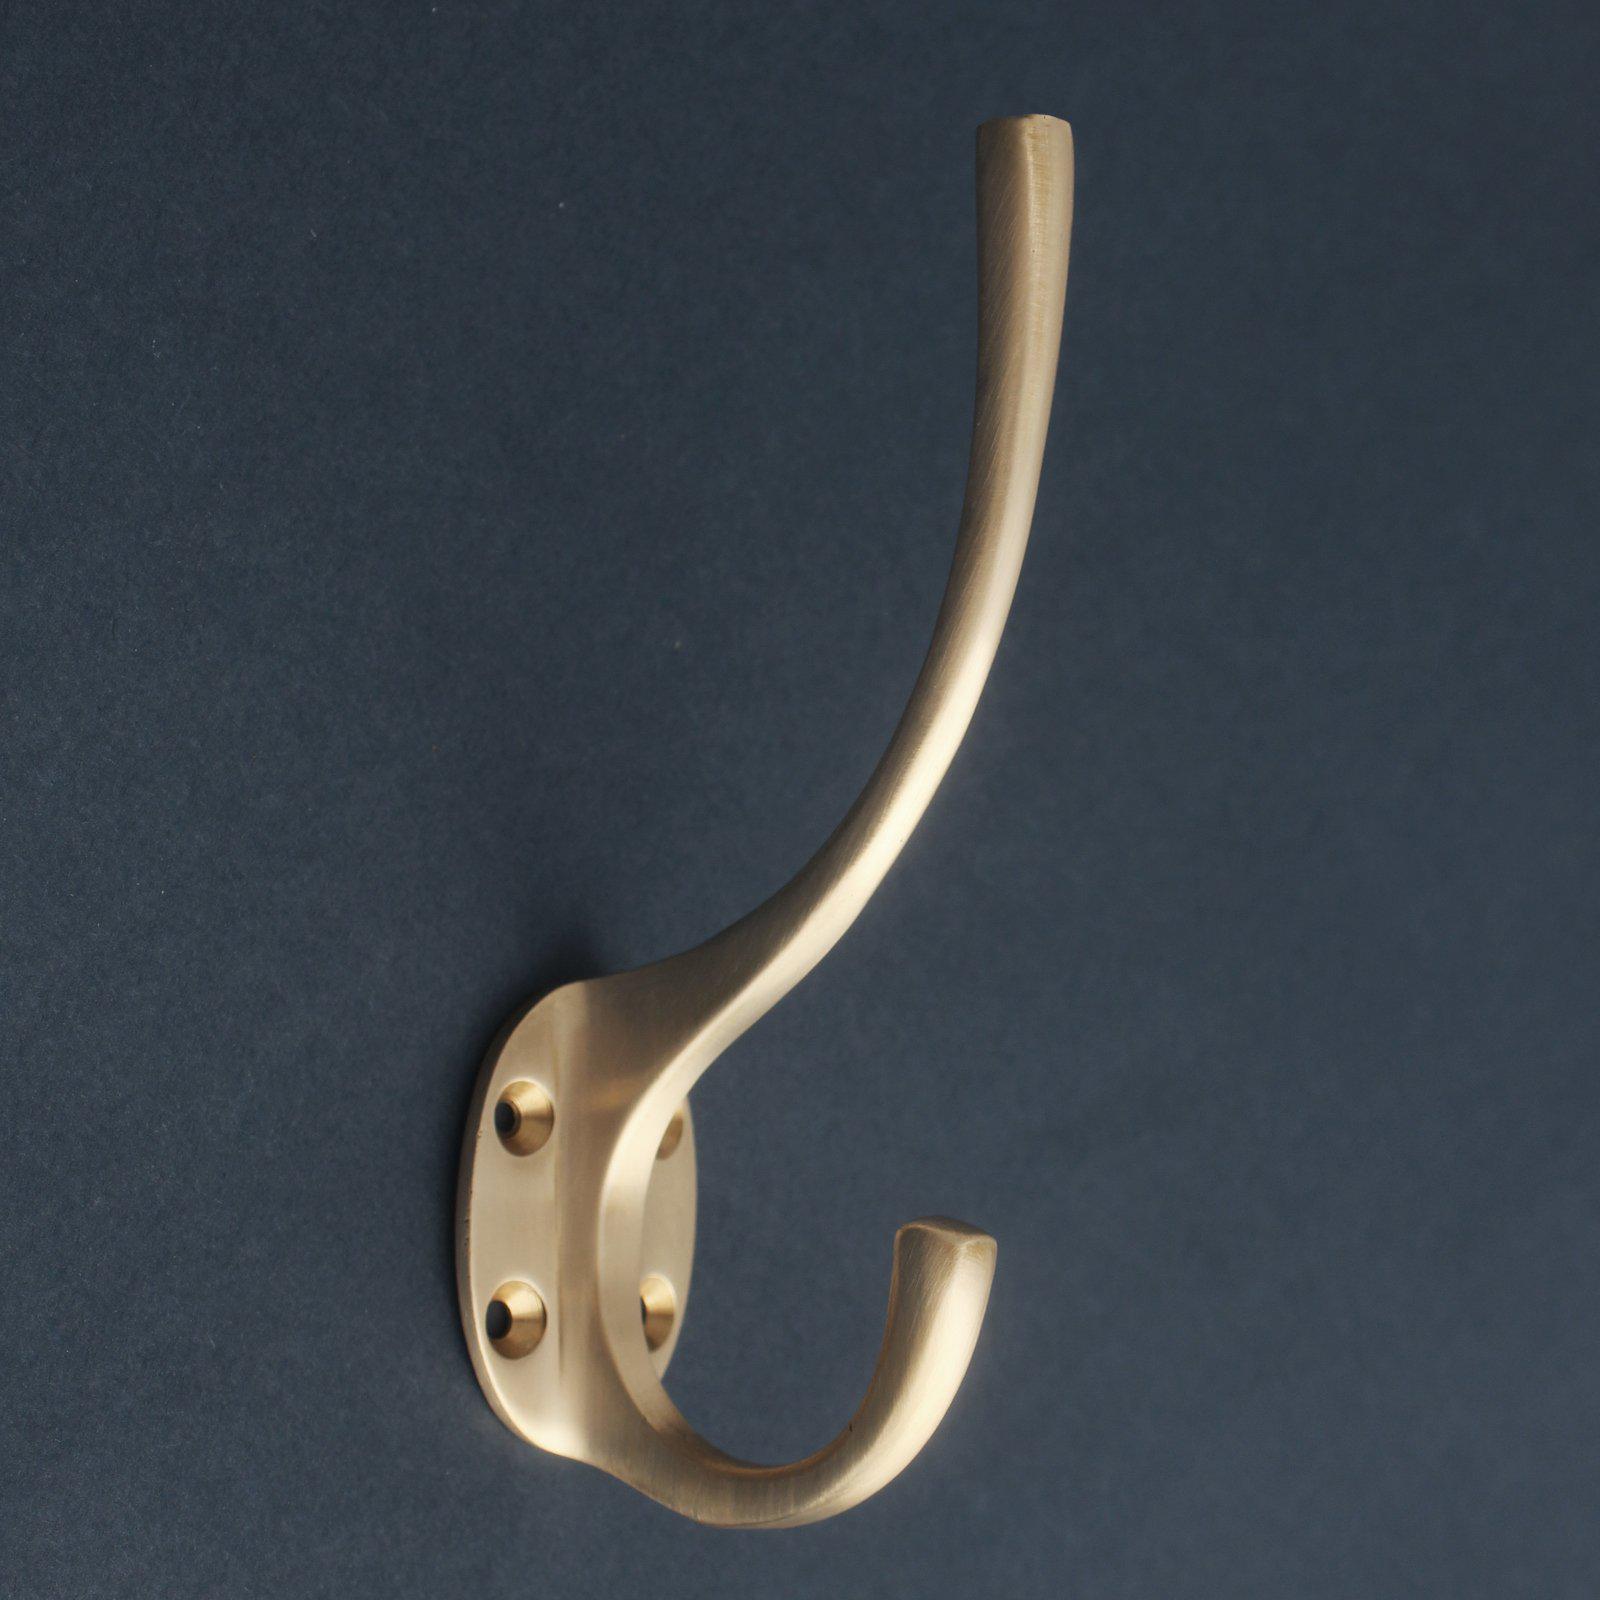 Brass coat hook with hook and eye, hook clothing accessory